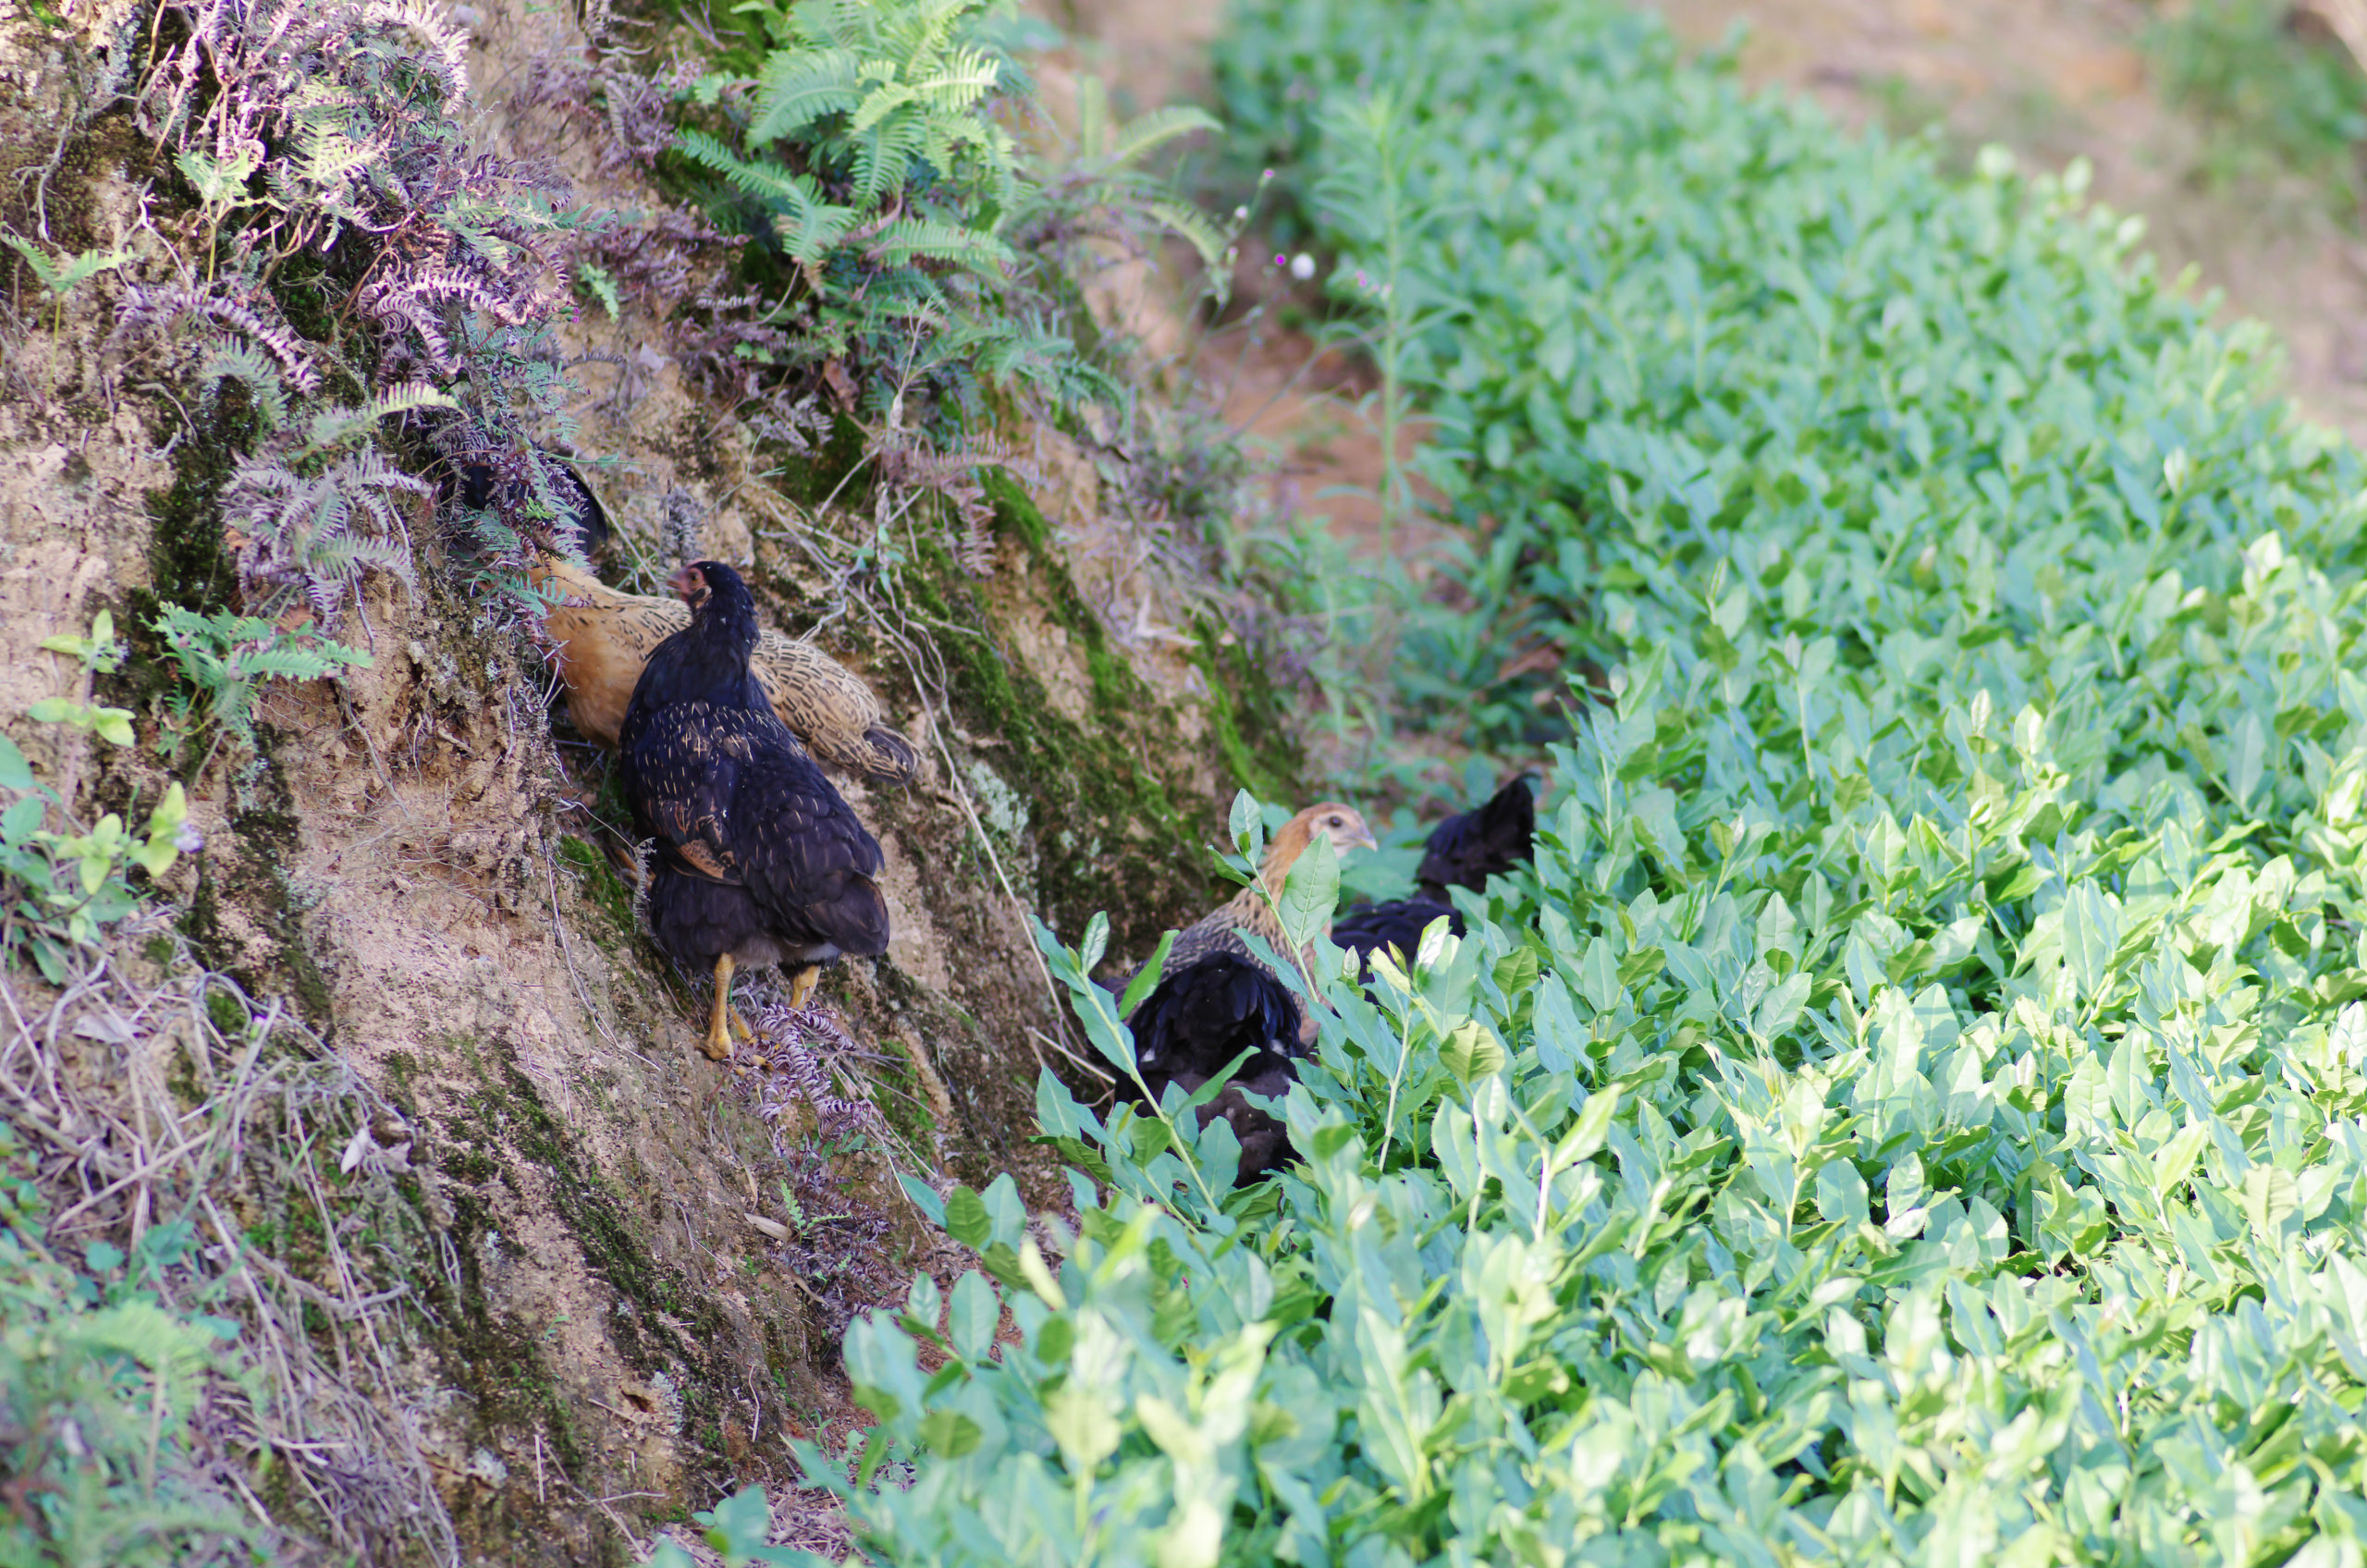 A few black and tan chickens foraging among low tea plants and on the dirt hill of the terrace rising next to them.